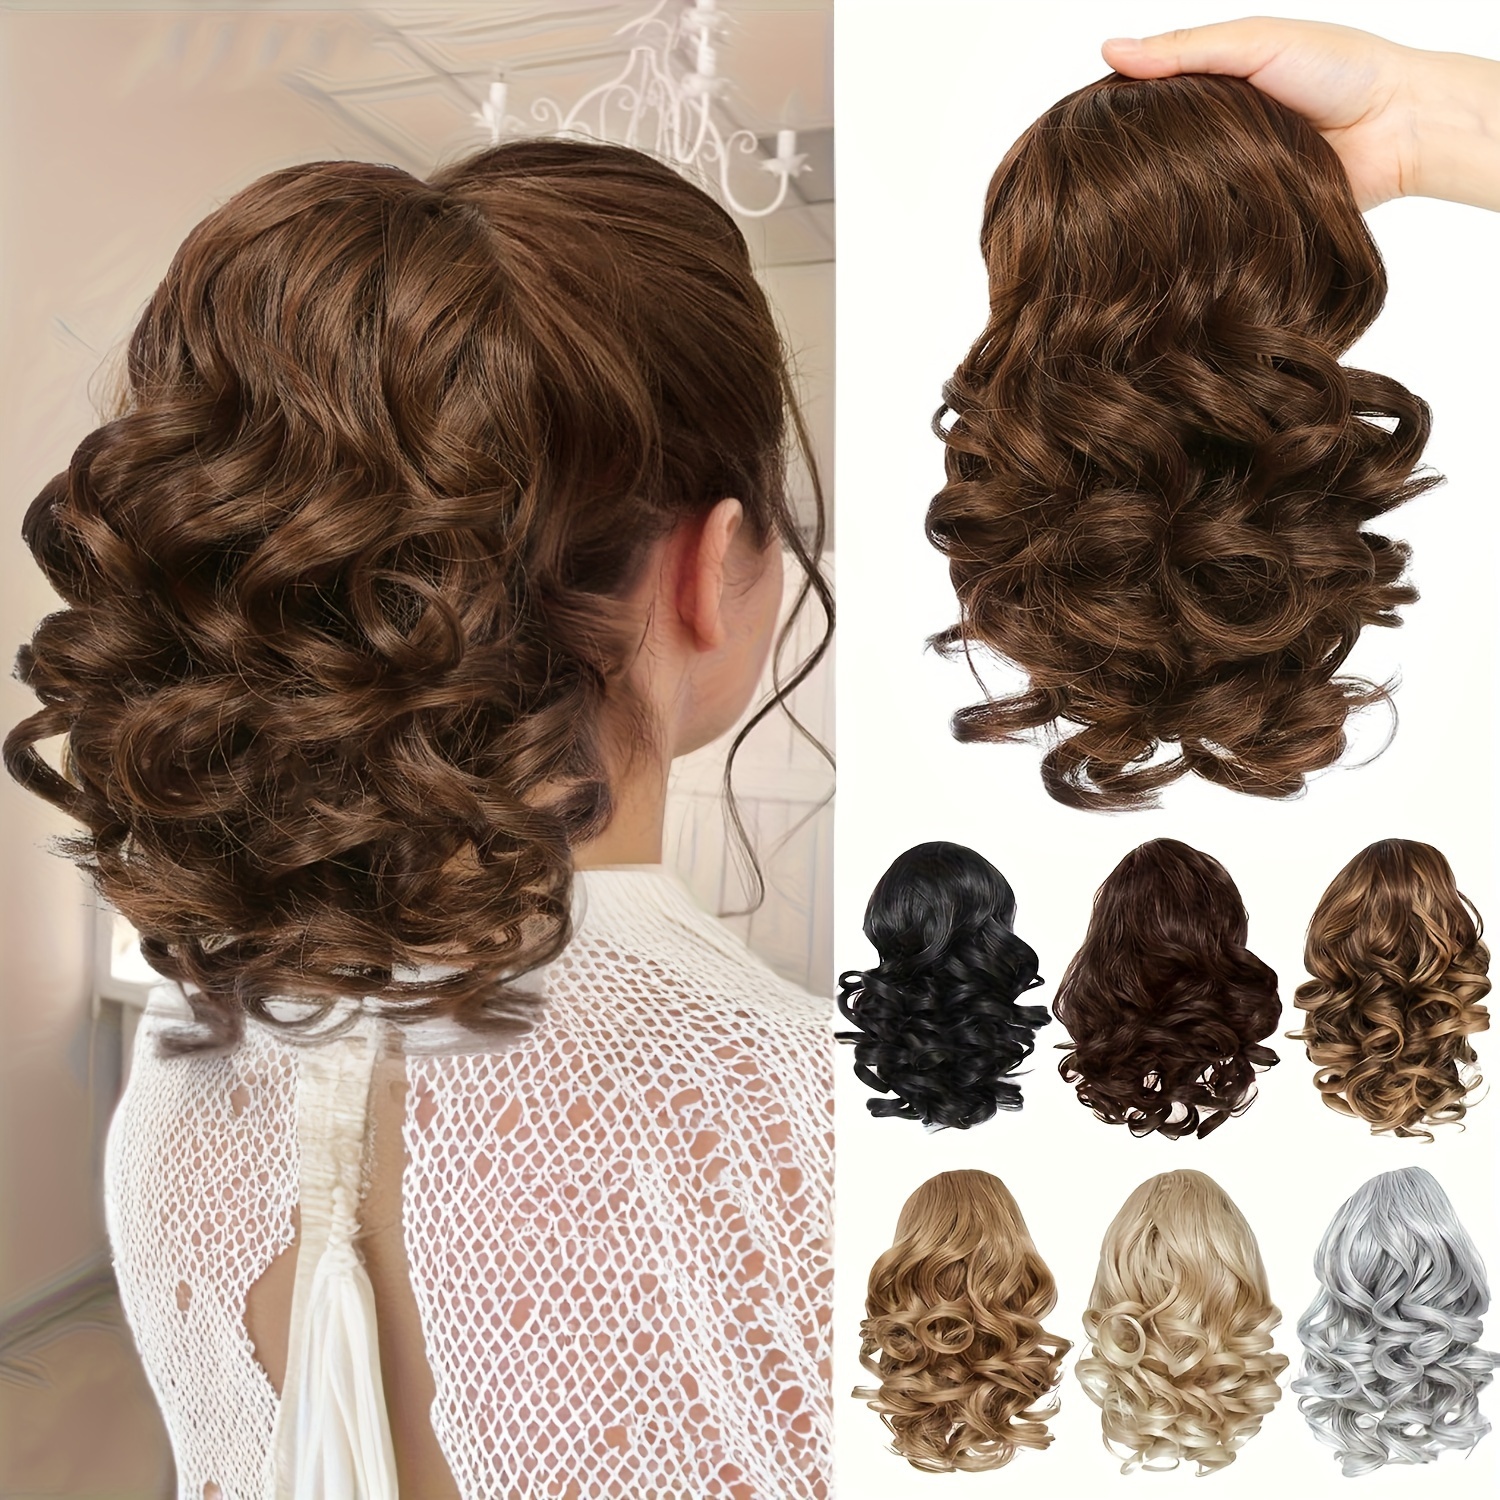 

Synthetic Ponytail Extension Claw Clip 10 Inch Curly Wavy Ponytail For Women Suitable For Daily Wear